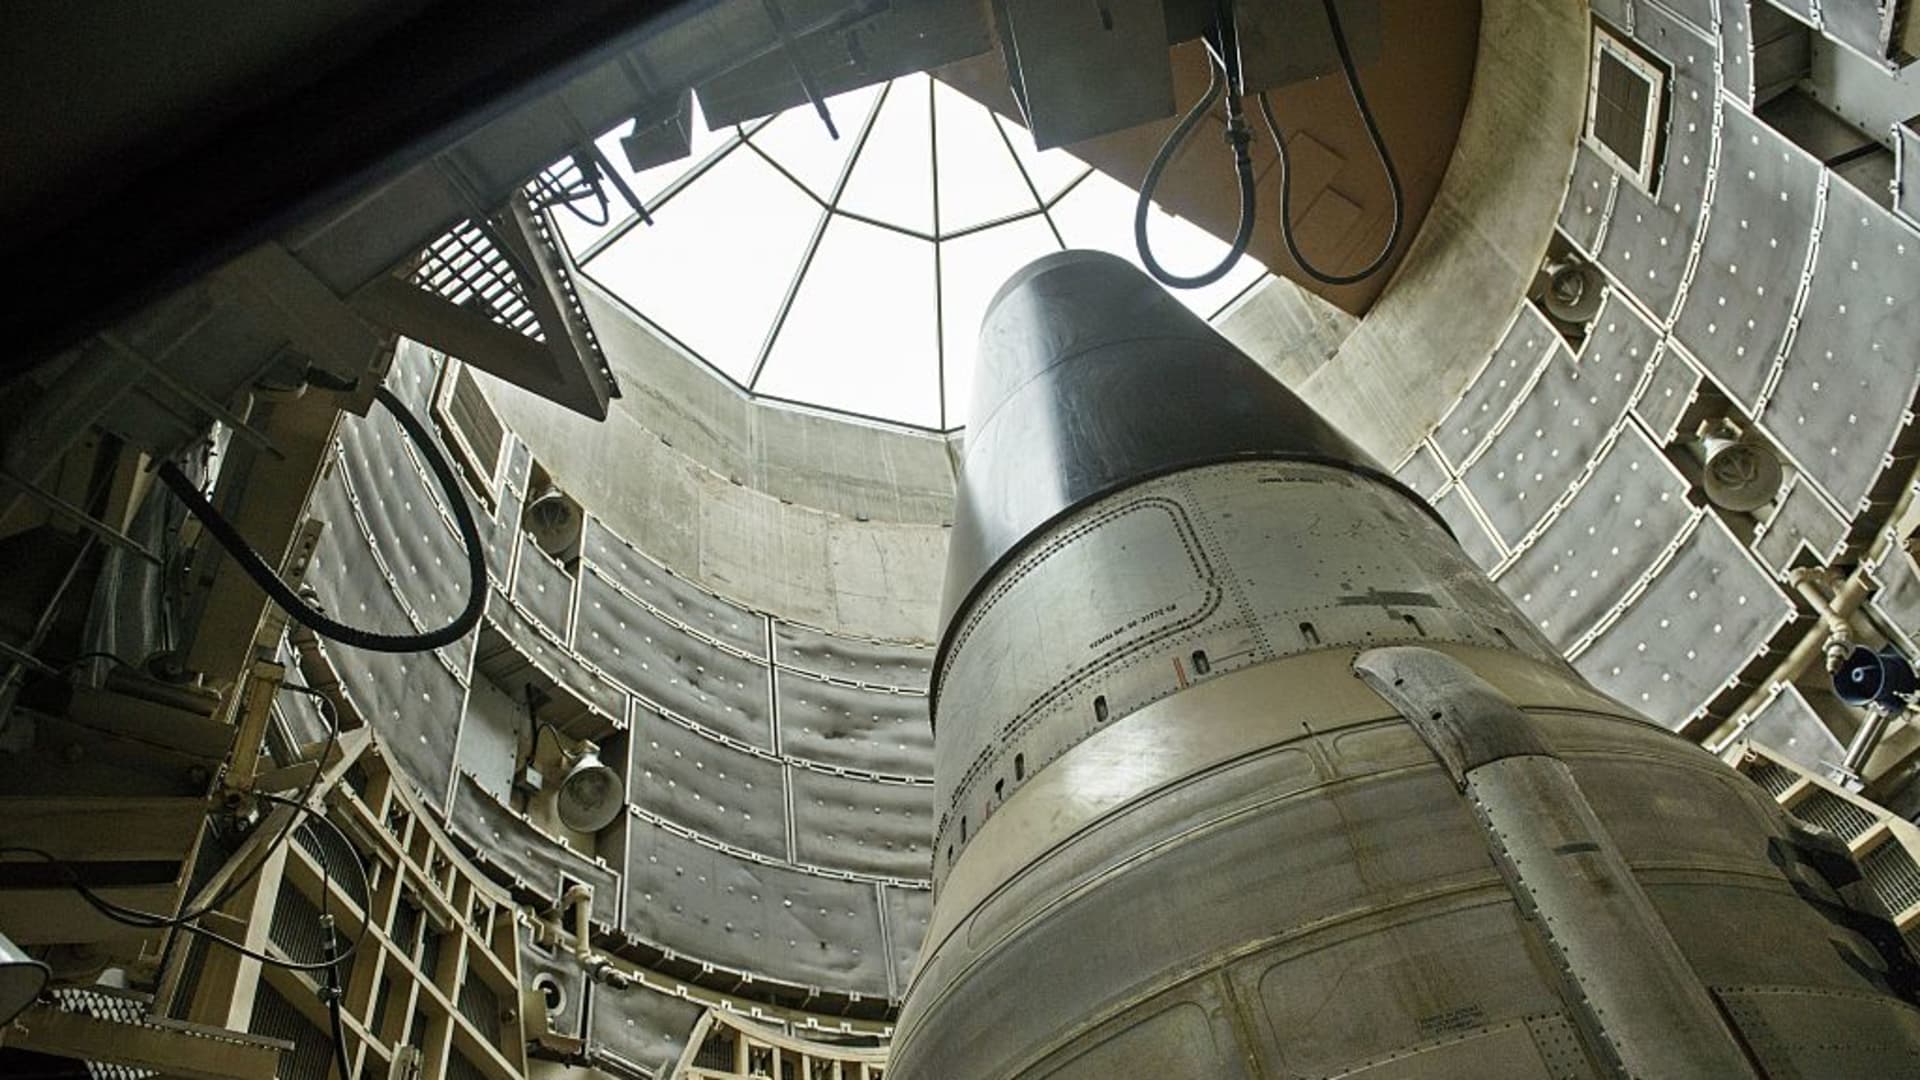 Congress Receives Nuclear Warhead Plan - Federation of American Scientists